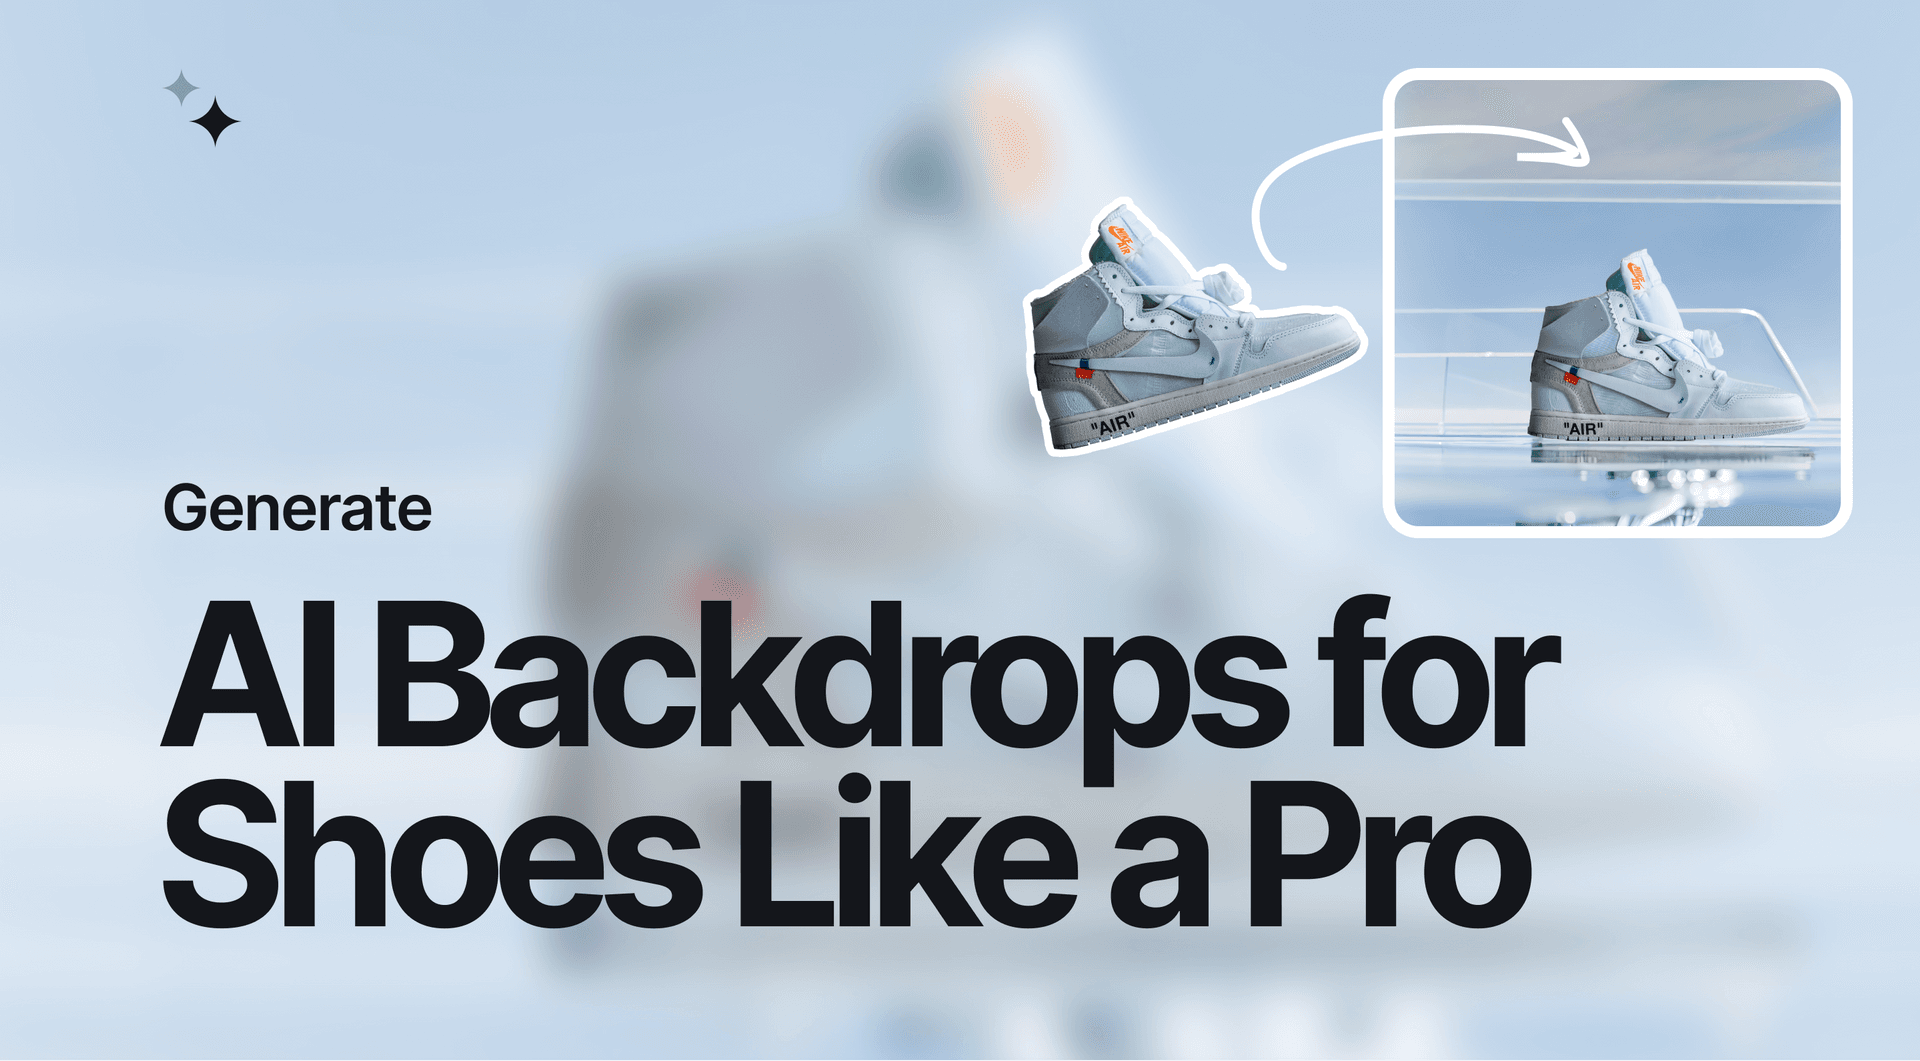 Picture for Generate AI Backgrounds for Footwear Product Photos Like a Pro article